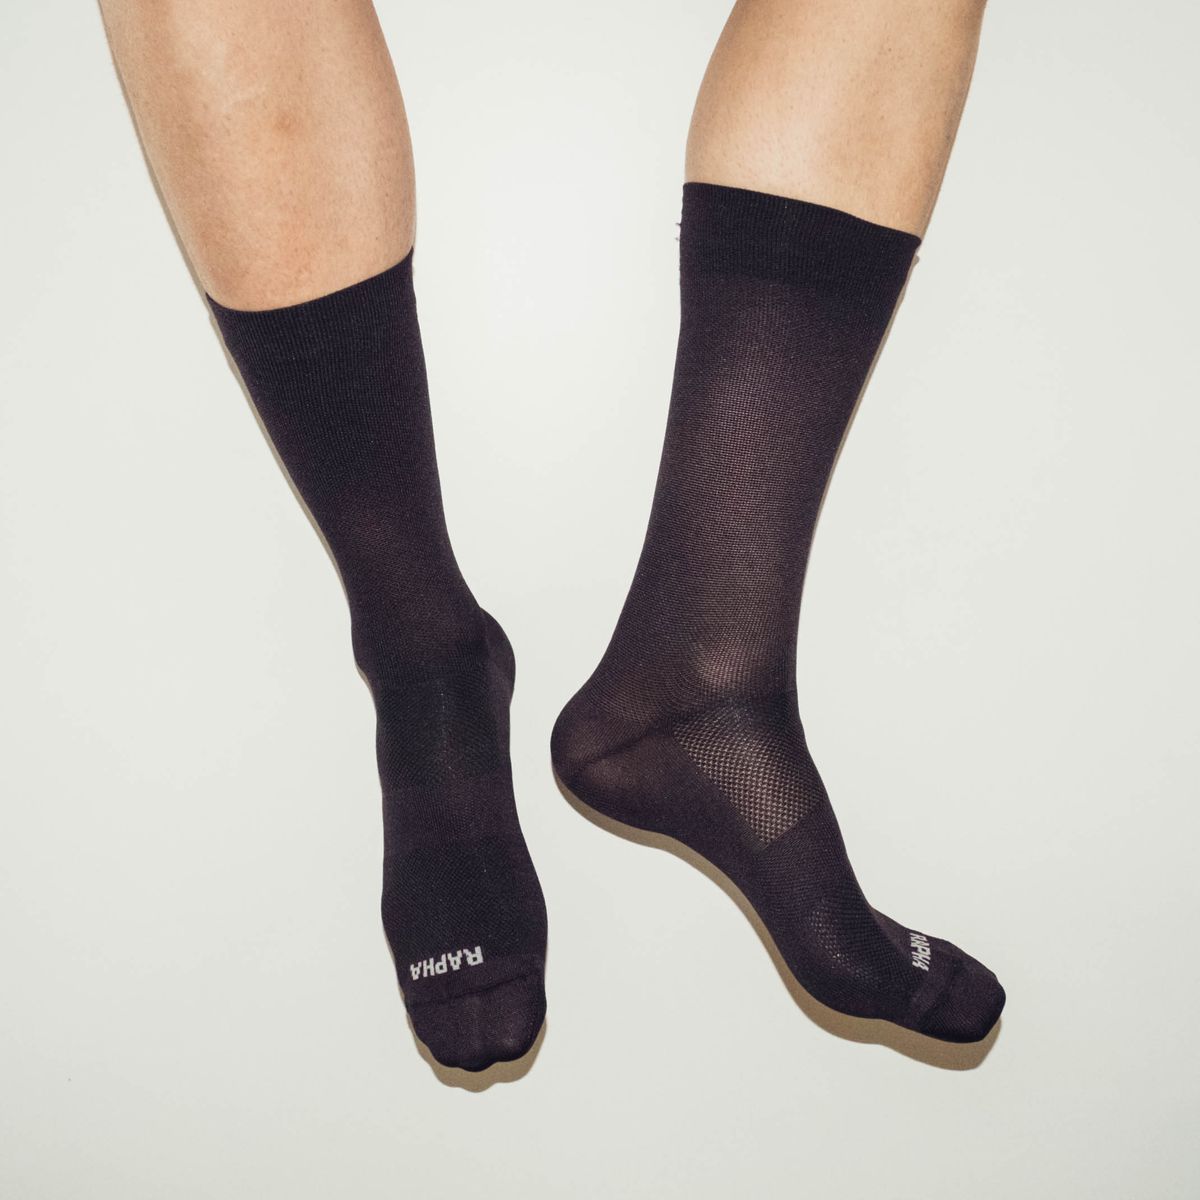 Best cycling socks: Breathable, fashionable, and well-made options for ...